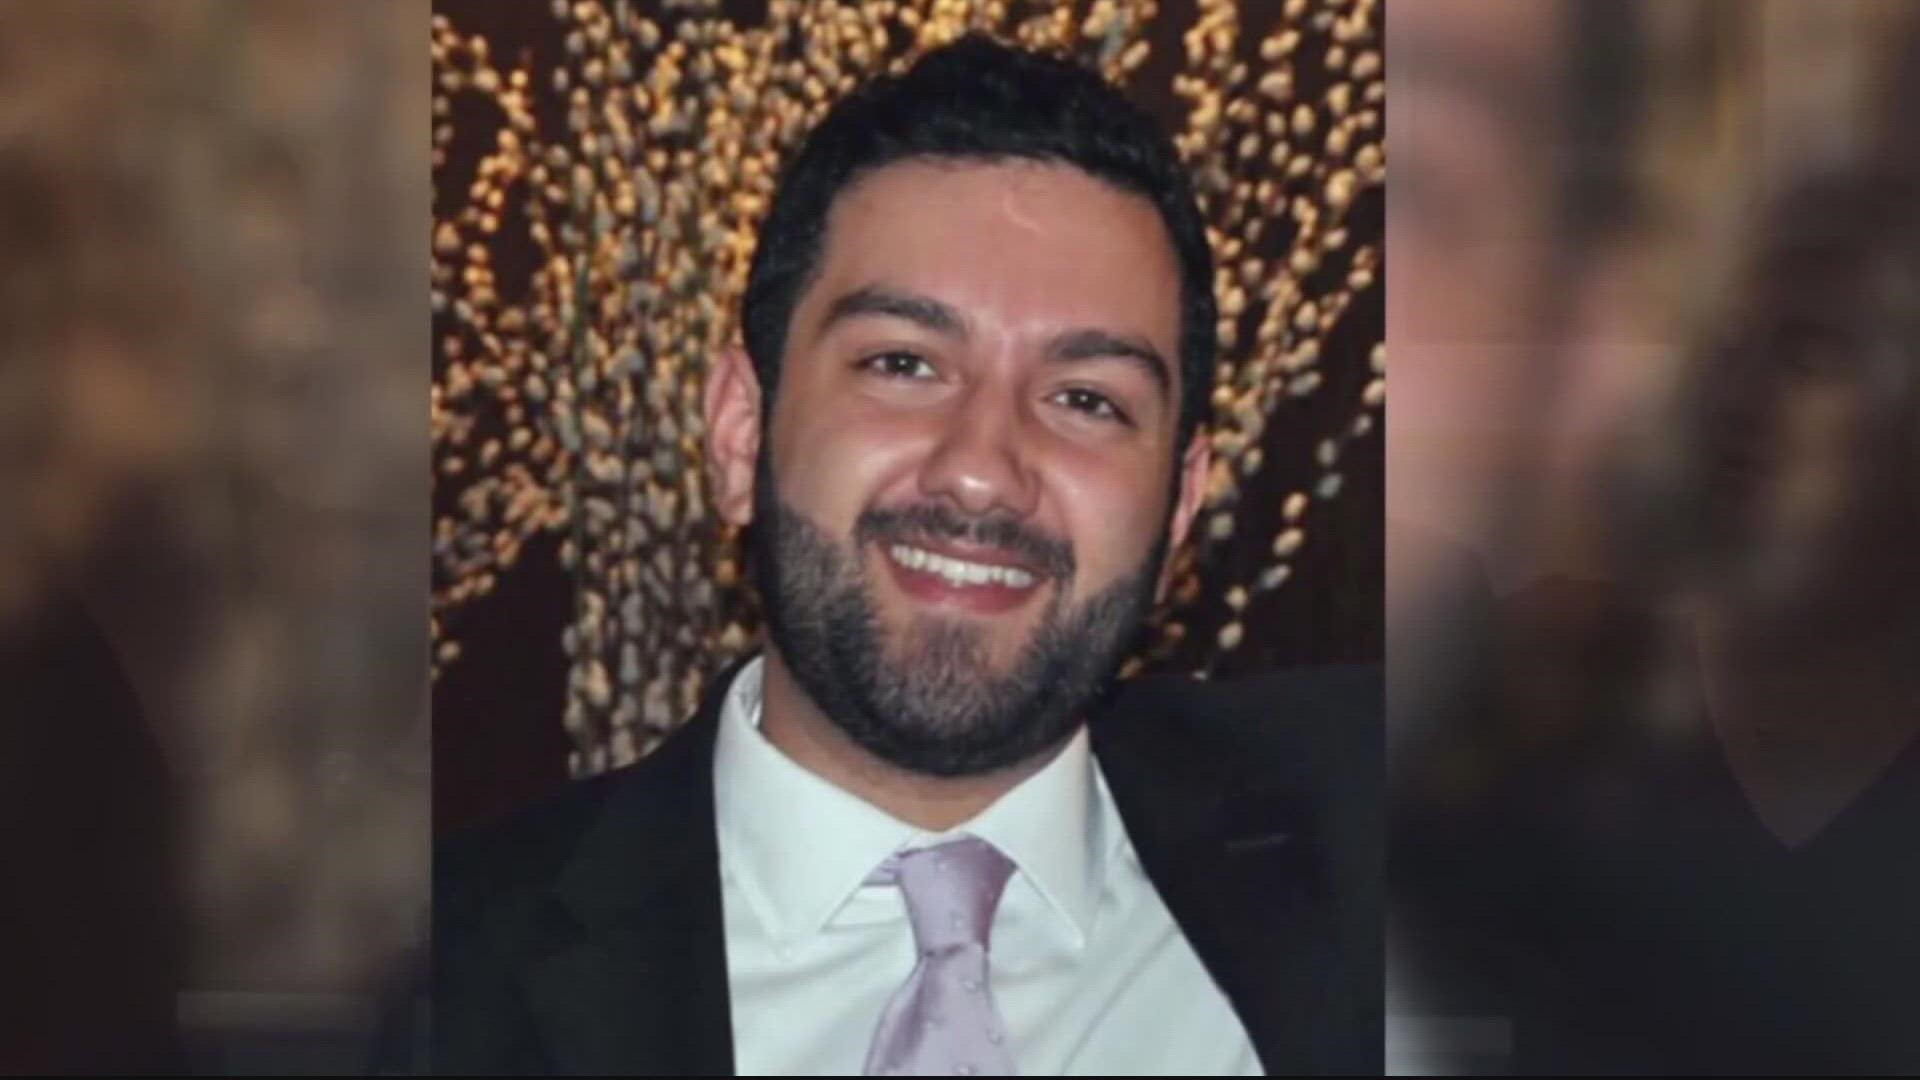 Virginia Attorney General Jason Miyares dropped an effort to prosecute two U.S. Park Police officers who fatally shot an unarmed man back in 2017.